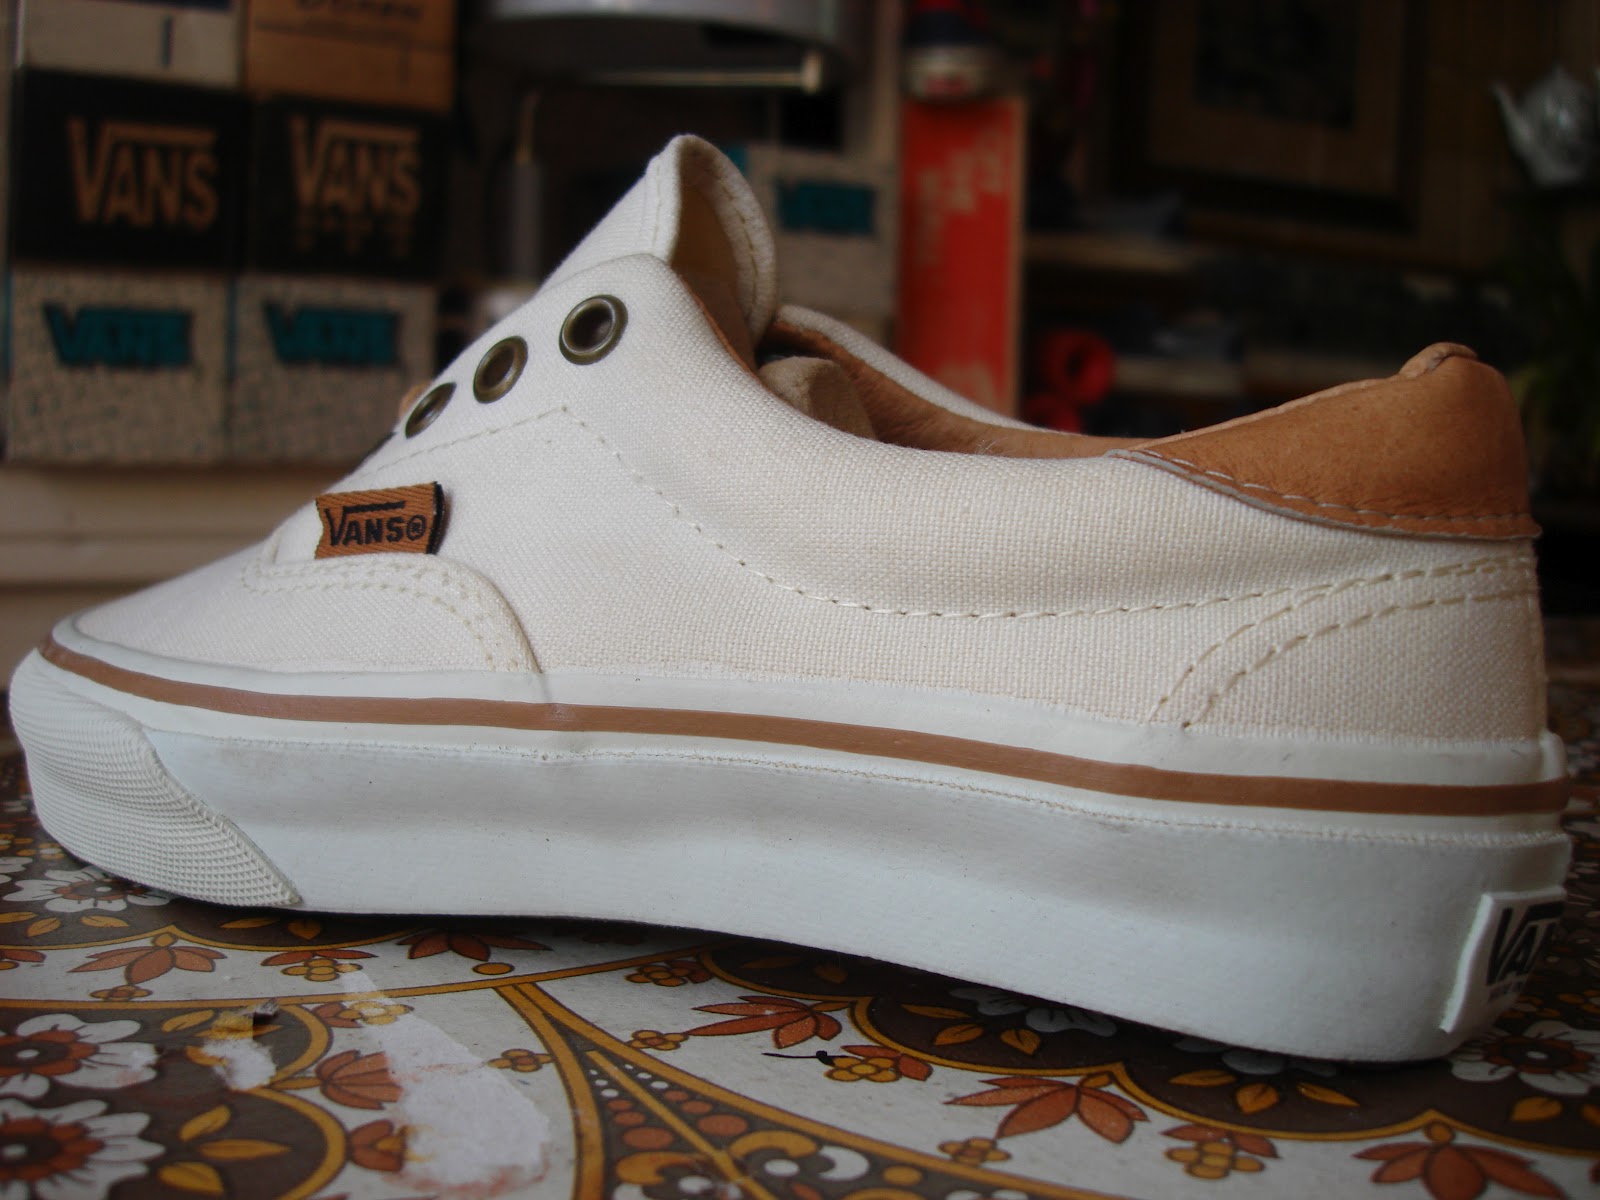 konsol Skinne pause theothersideofthepillow: vintage VANS white & tan leather CRESCENT ISLAND  style #59 era MADE IN USA 1990's US4.5